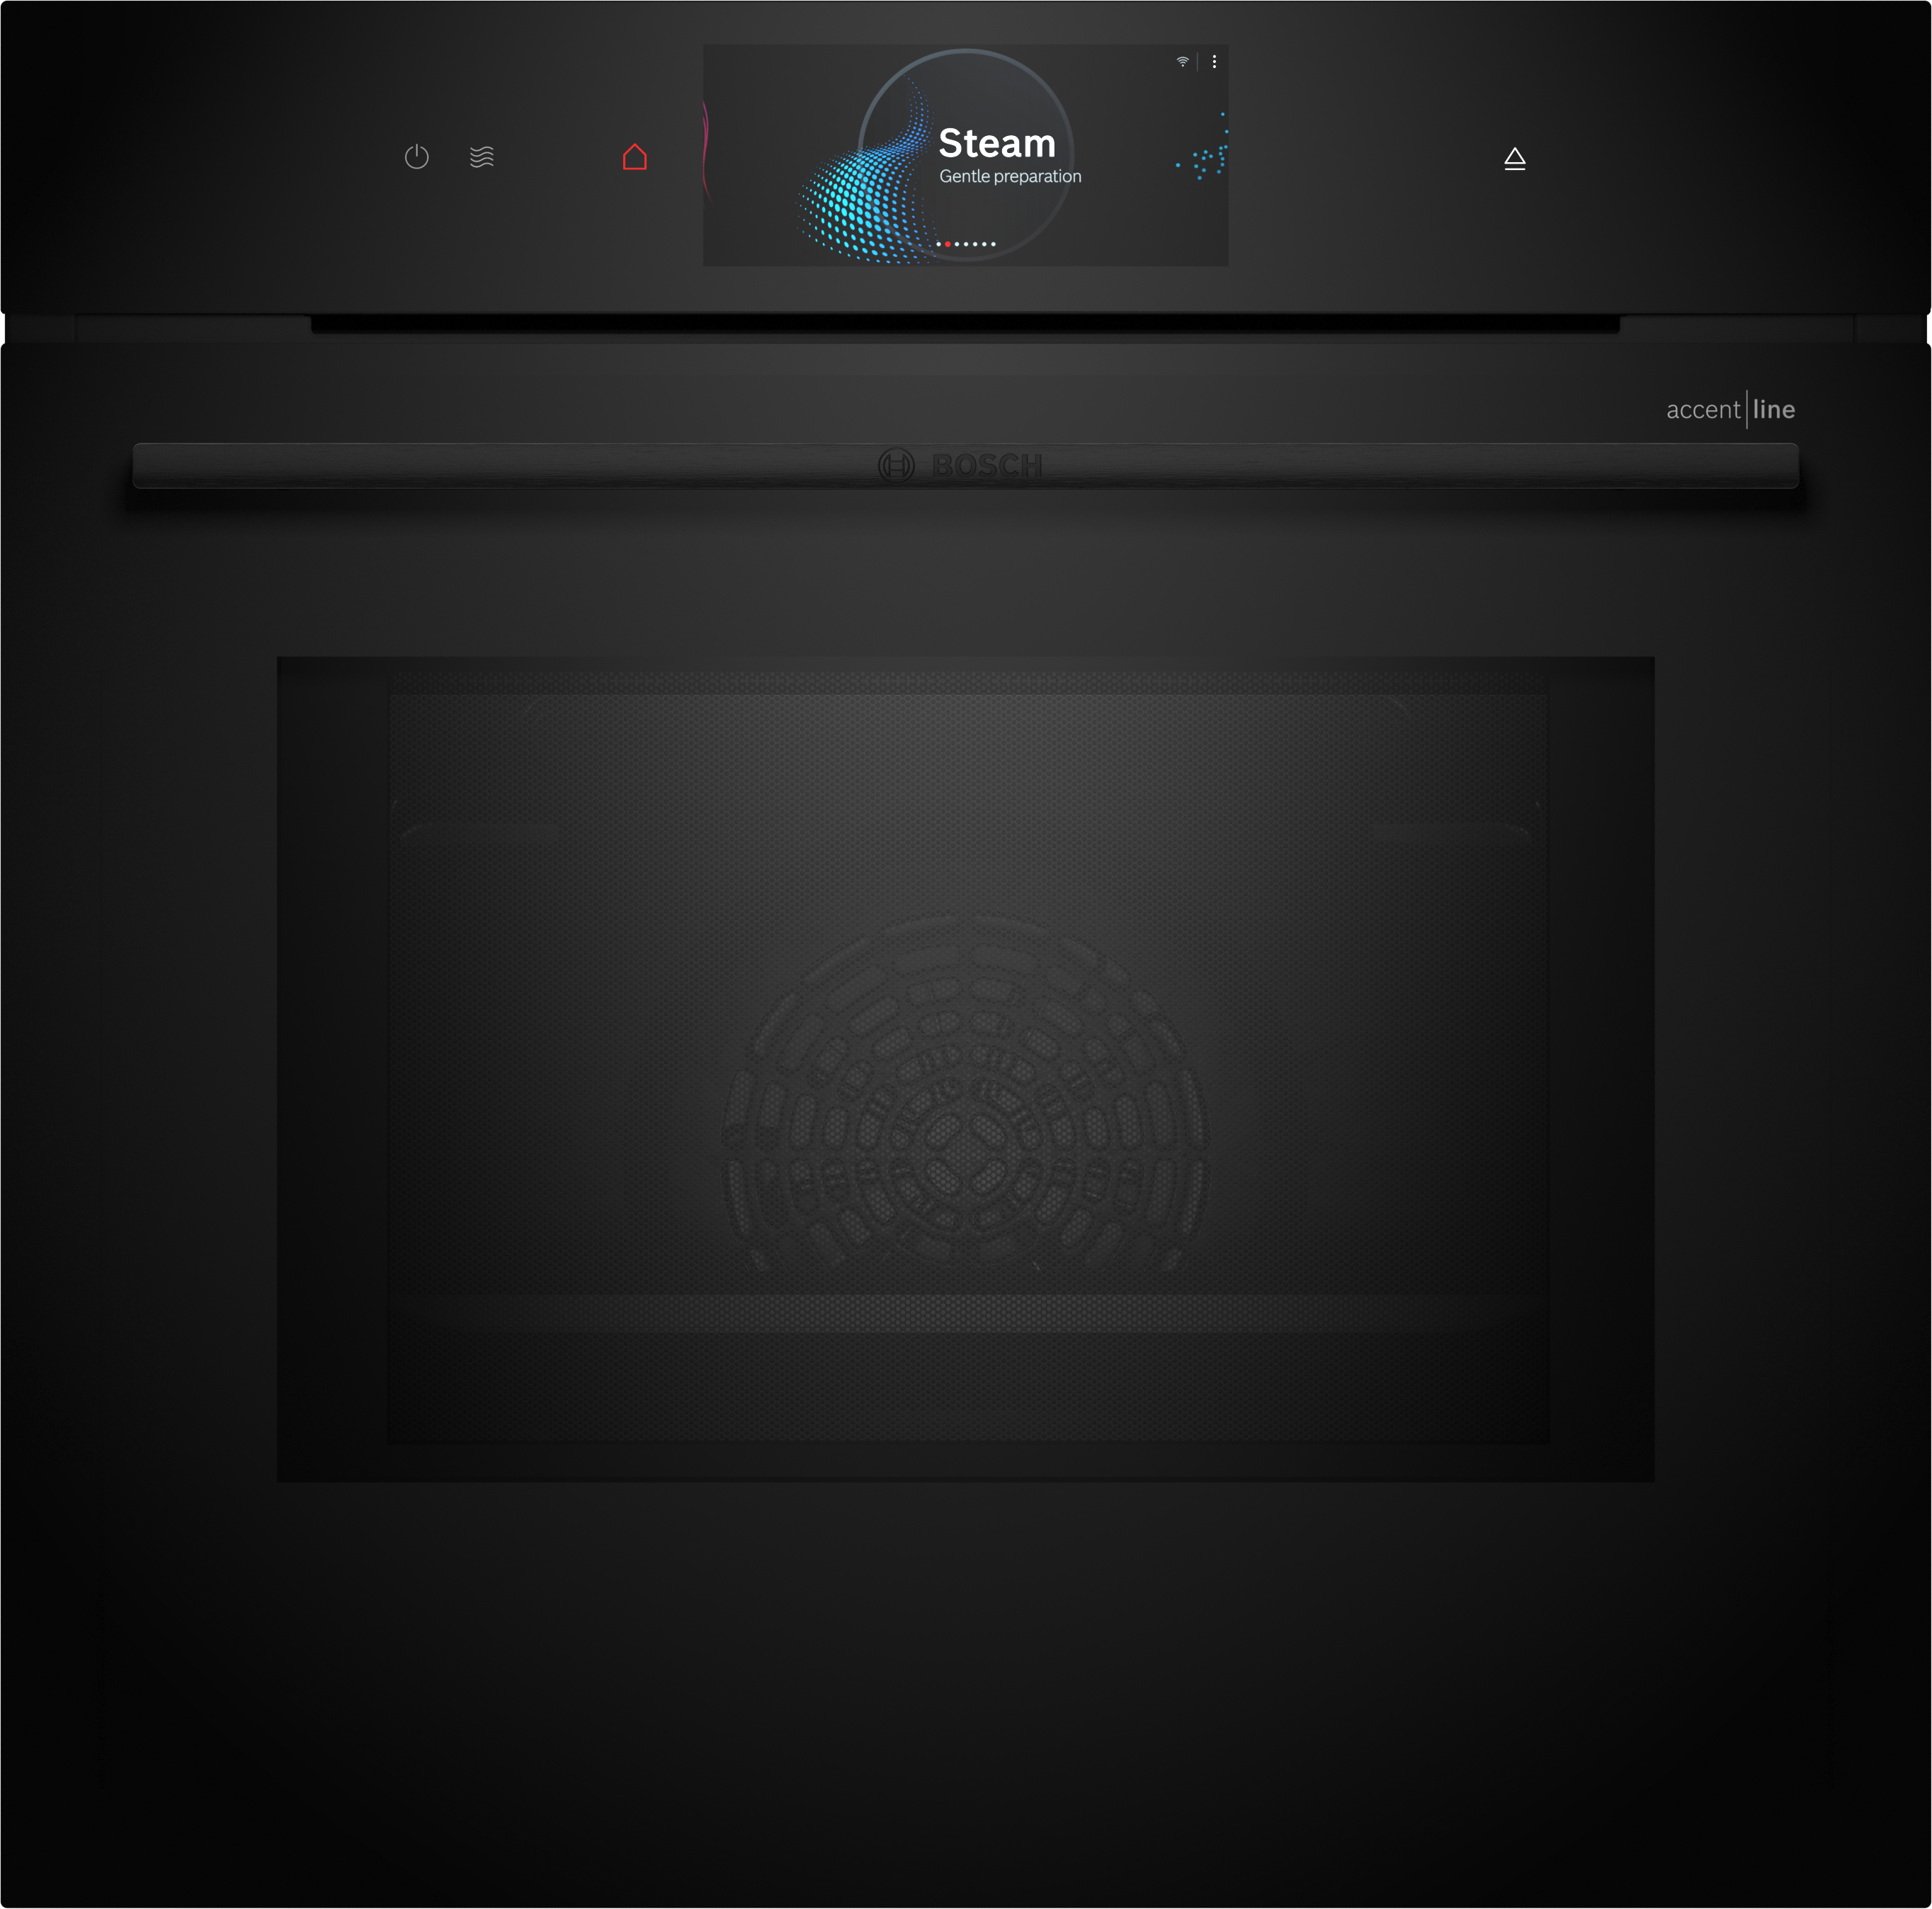 Series 8, built-in oven with added steam and microwave function, 60 x 60 cm, black, hng978qb1